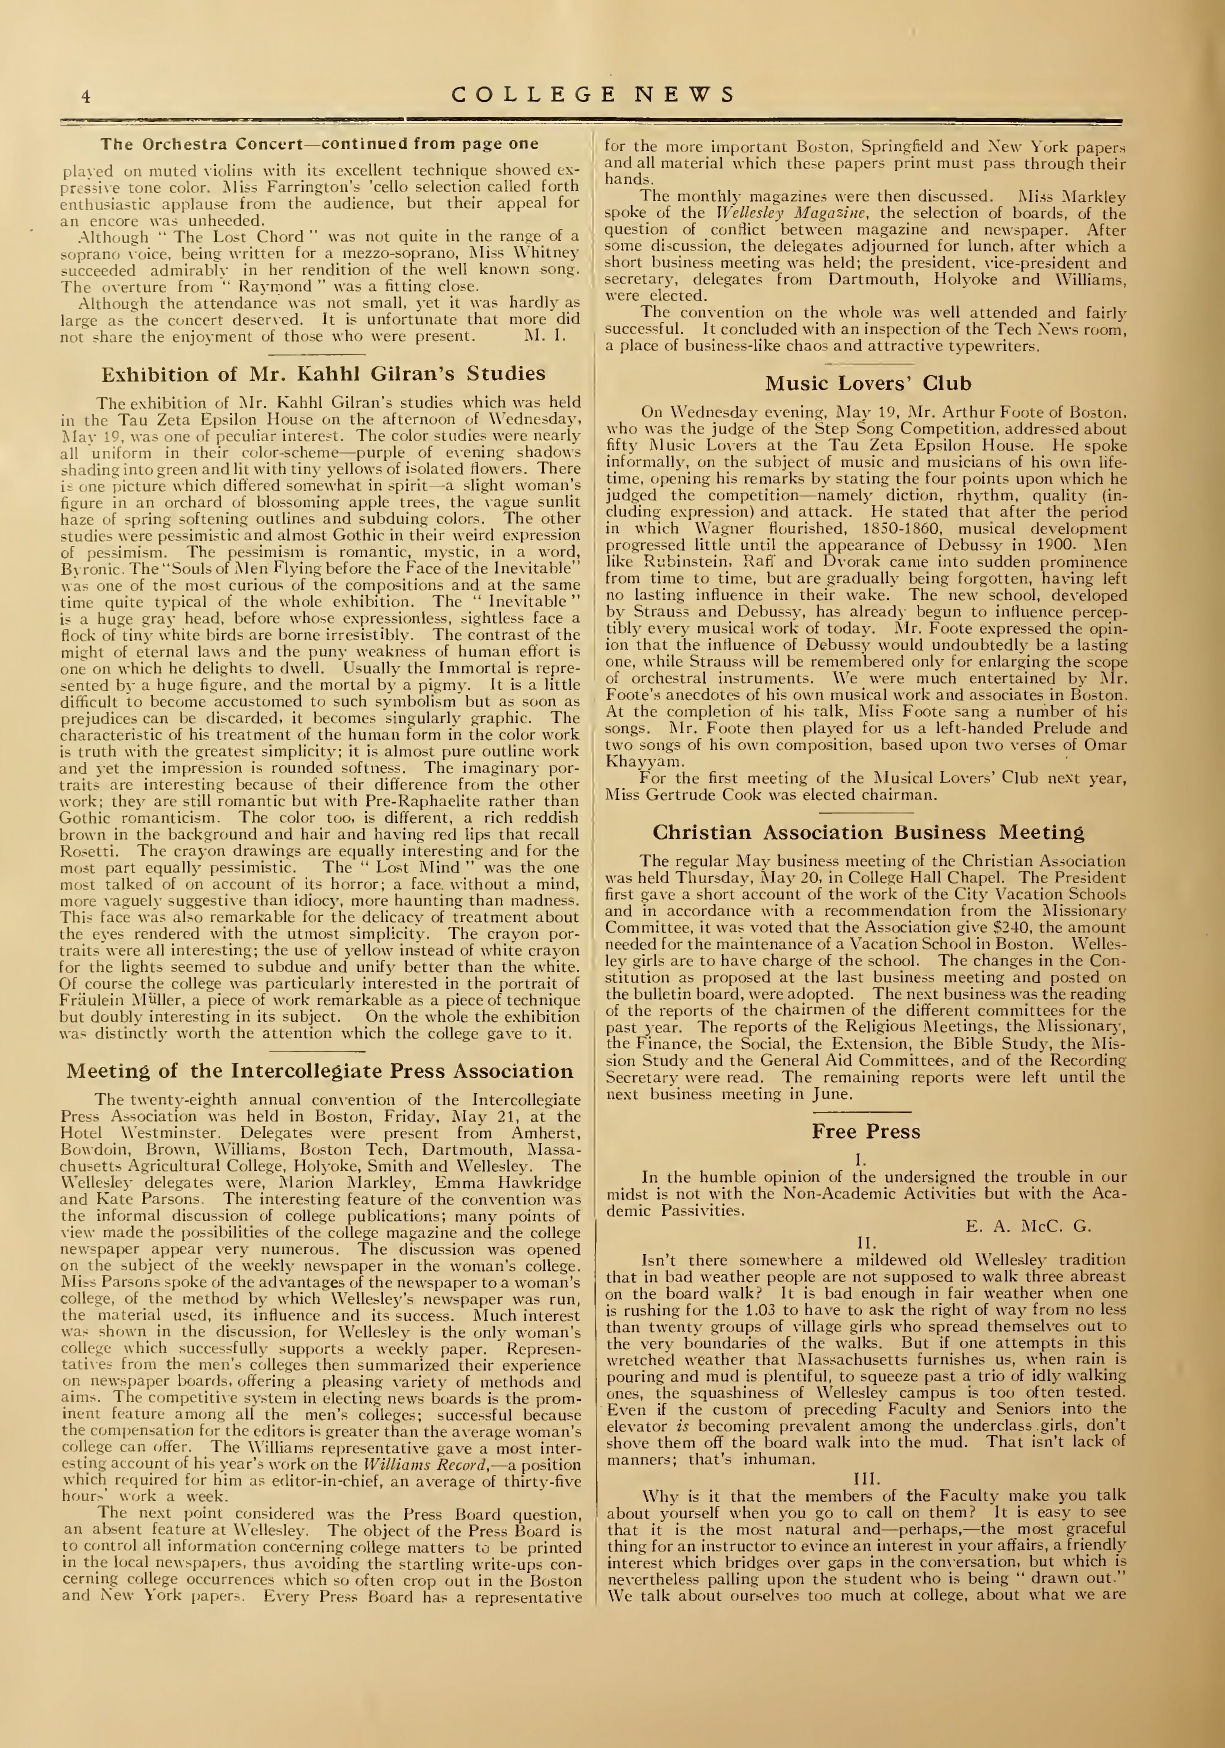 Exhibition of Mr. Kahlil Gibran's Studies [Review], The Wellesley College News, 05-26-1909